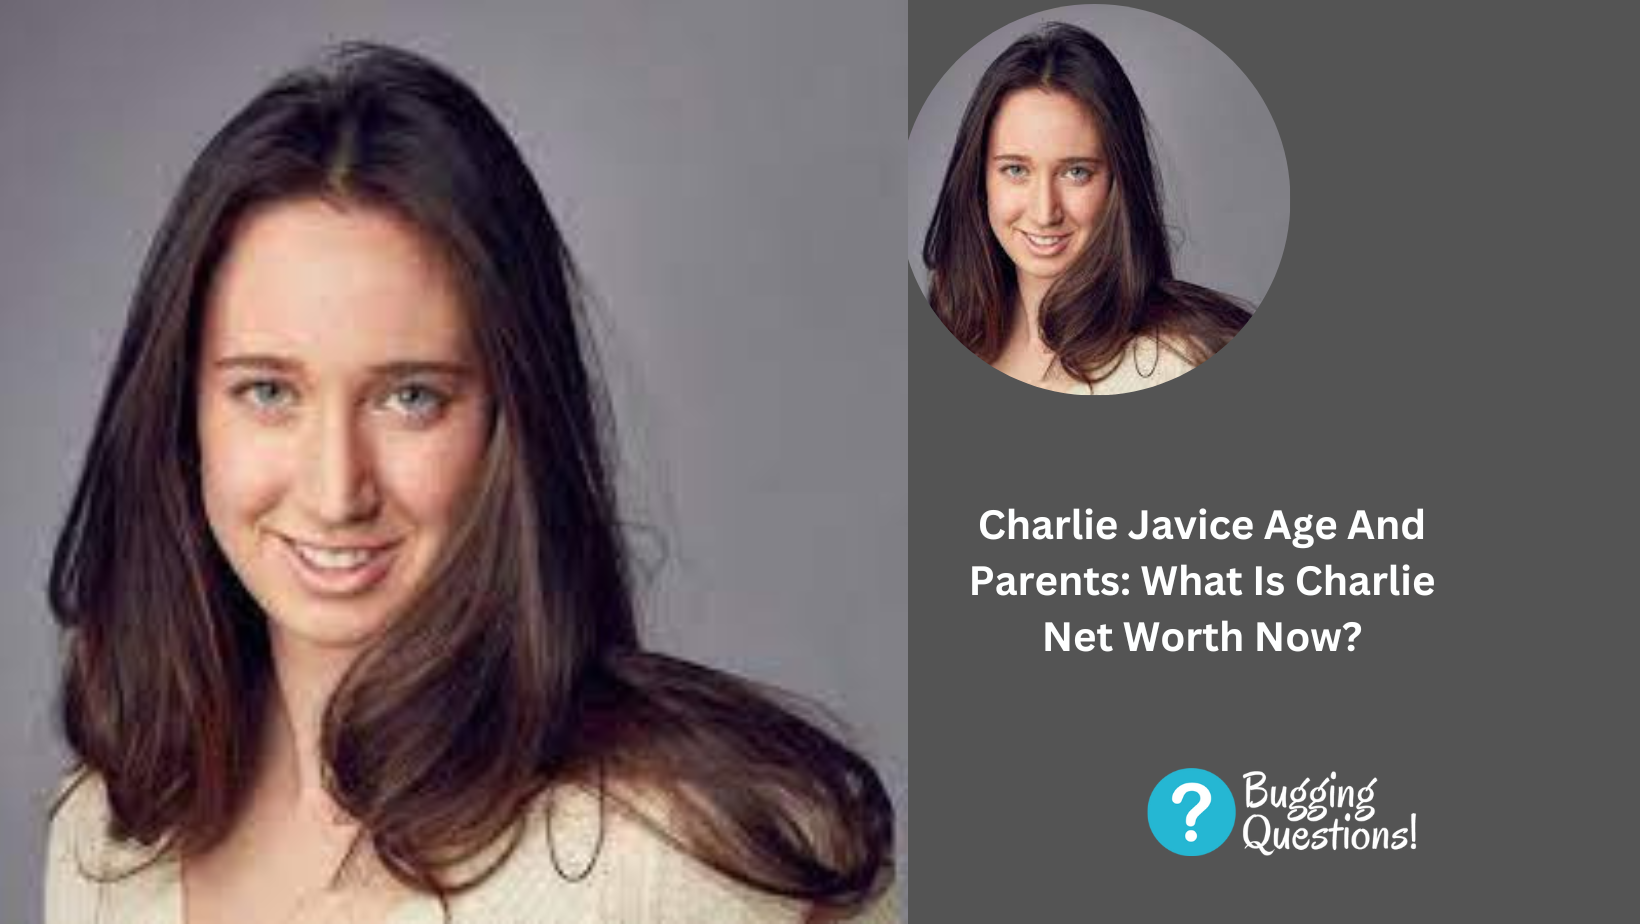 Charlie Javice Age And Parents: What Is Charlie Net Worth Now?